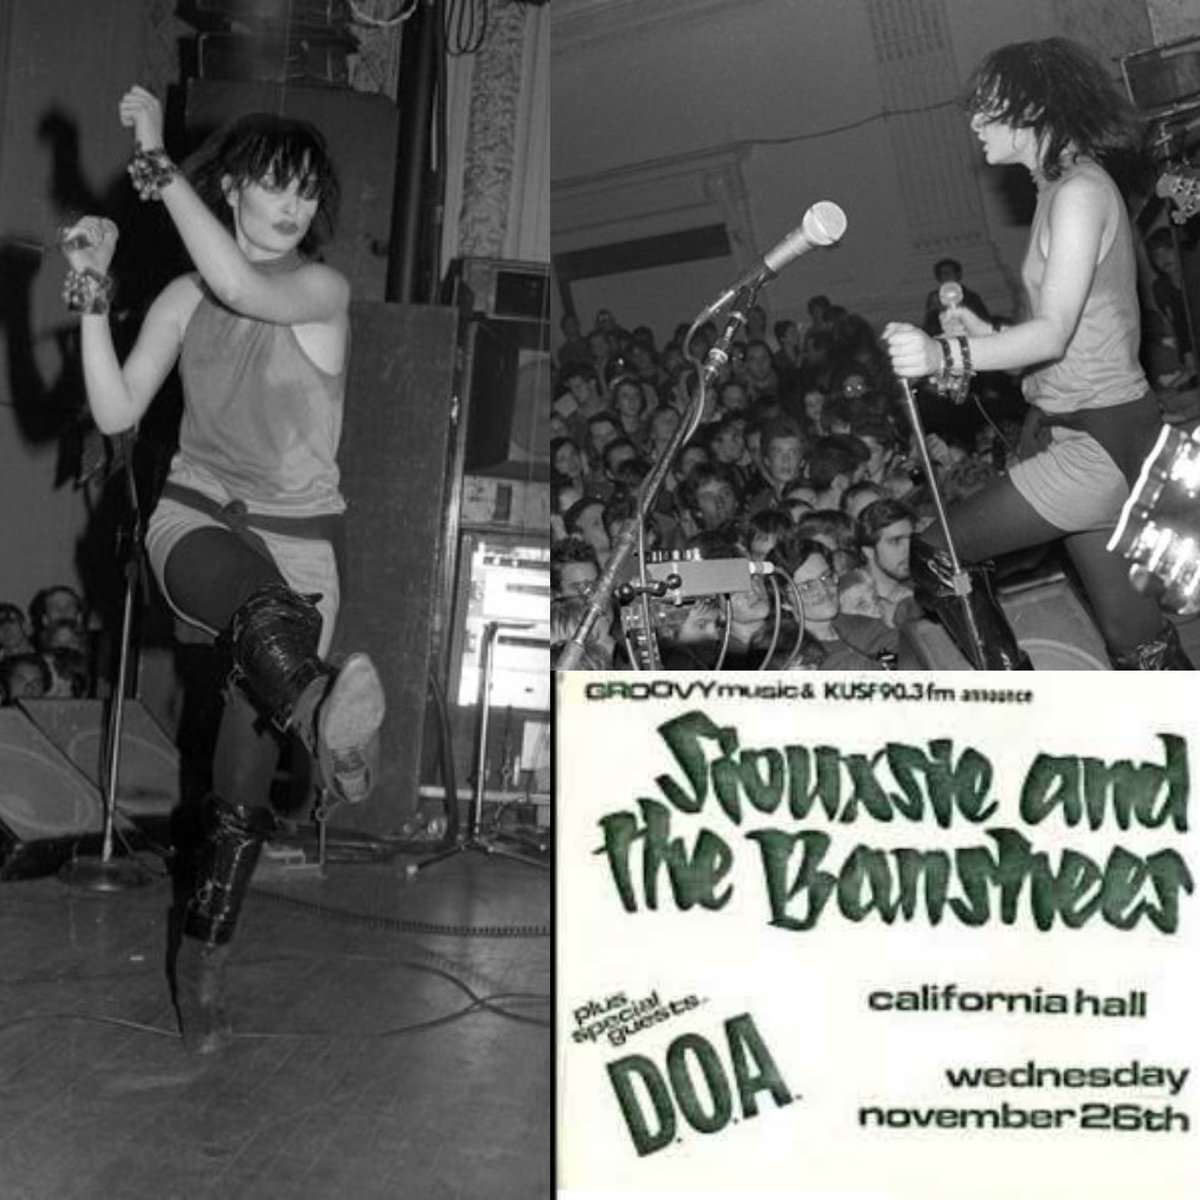 43 years ago today
Siouxsie and the Banshees supported by D.O.A at California Hall, San Francisco, November 26, 1980.

Photos by Chester Simpson

#punk #punks #gothpunkrock #siouxsiesioux #doa #siouxsieandthebanshees #history #punkrockhistory